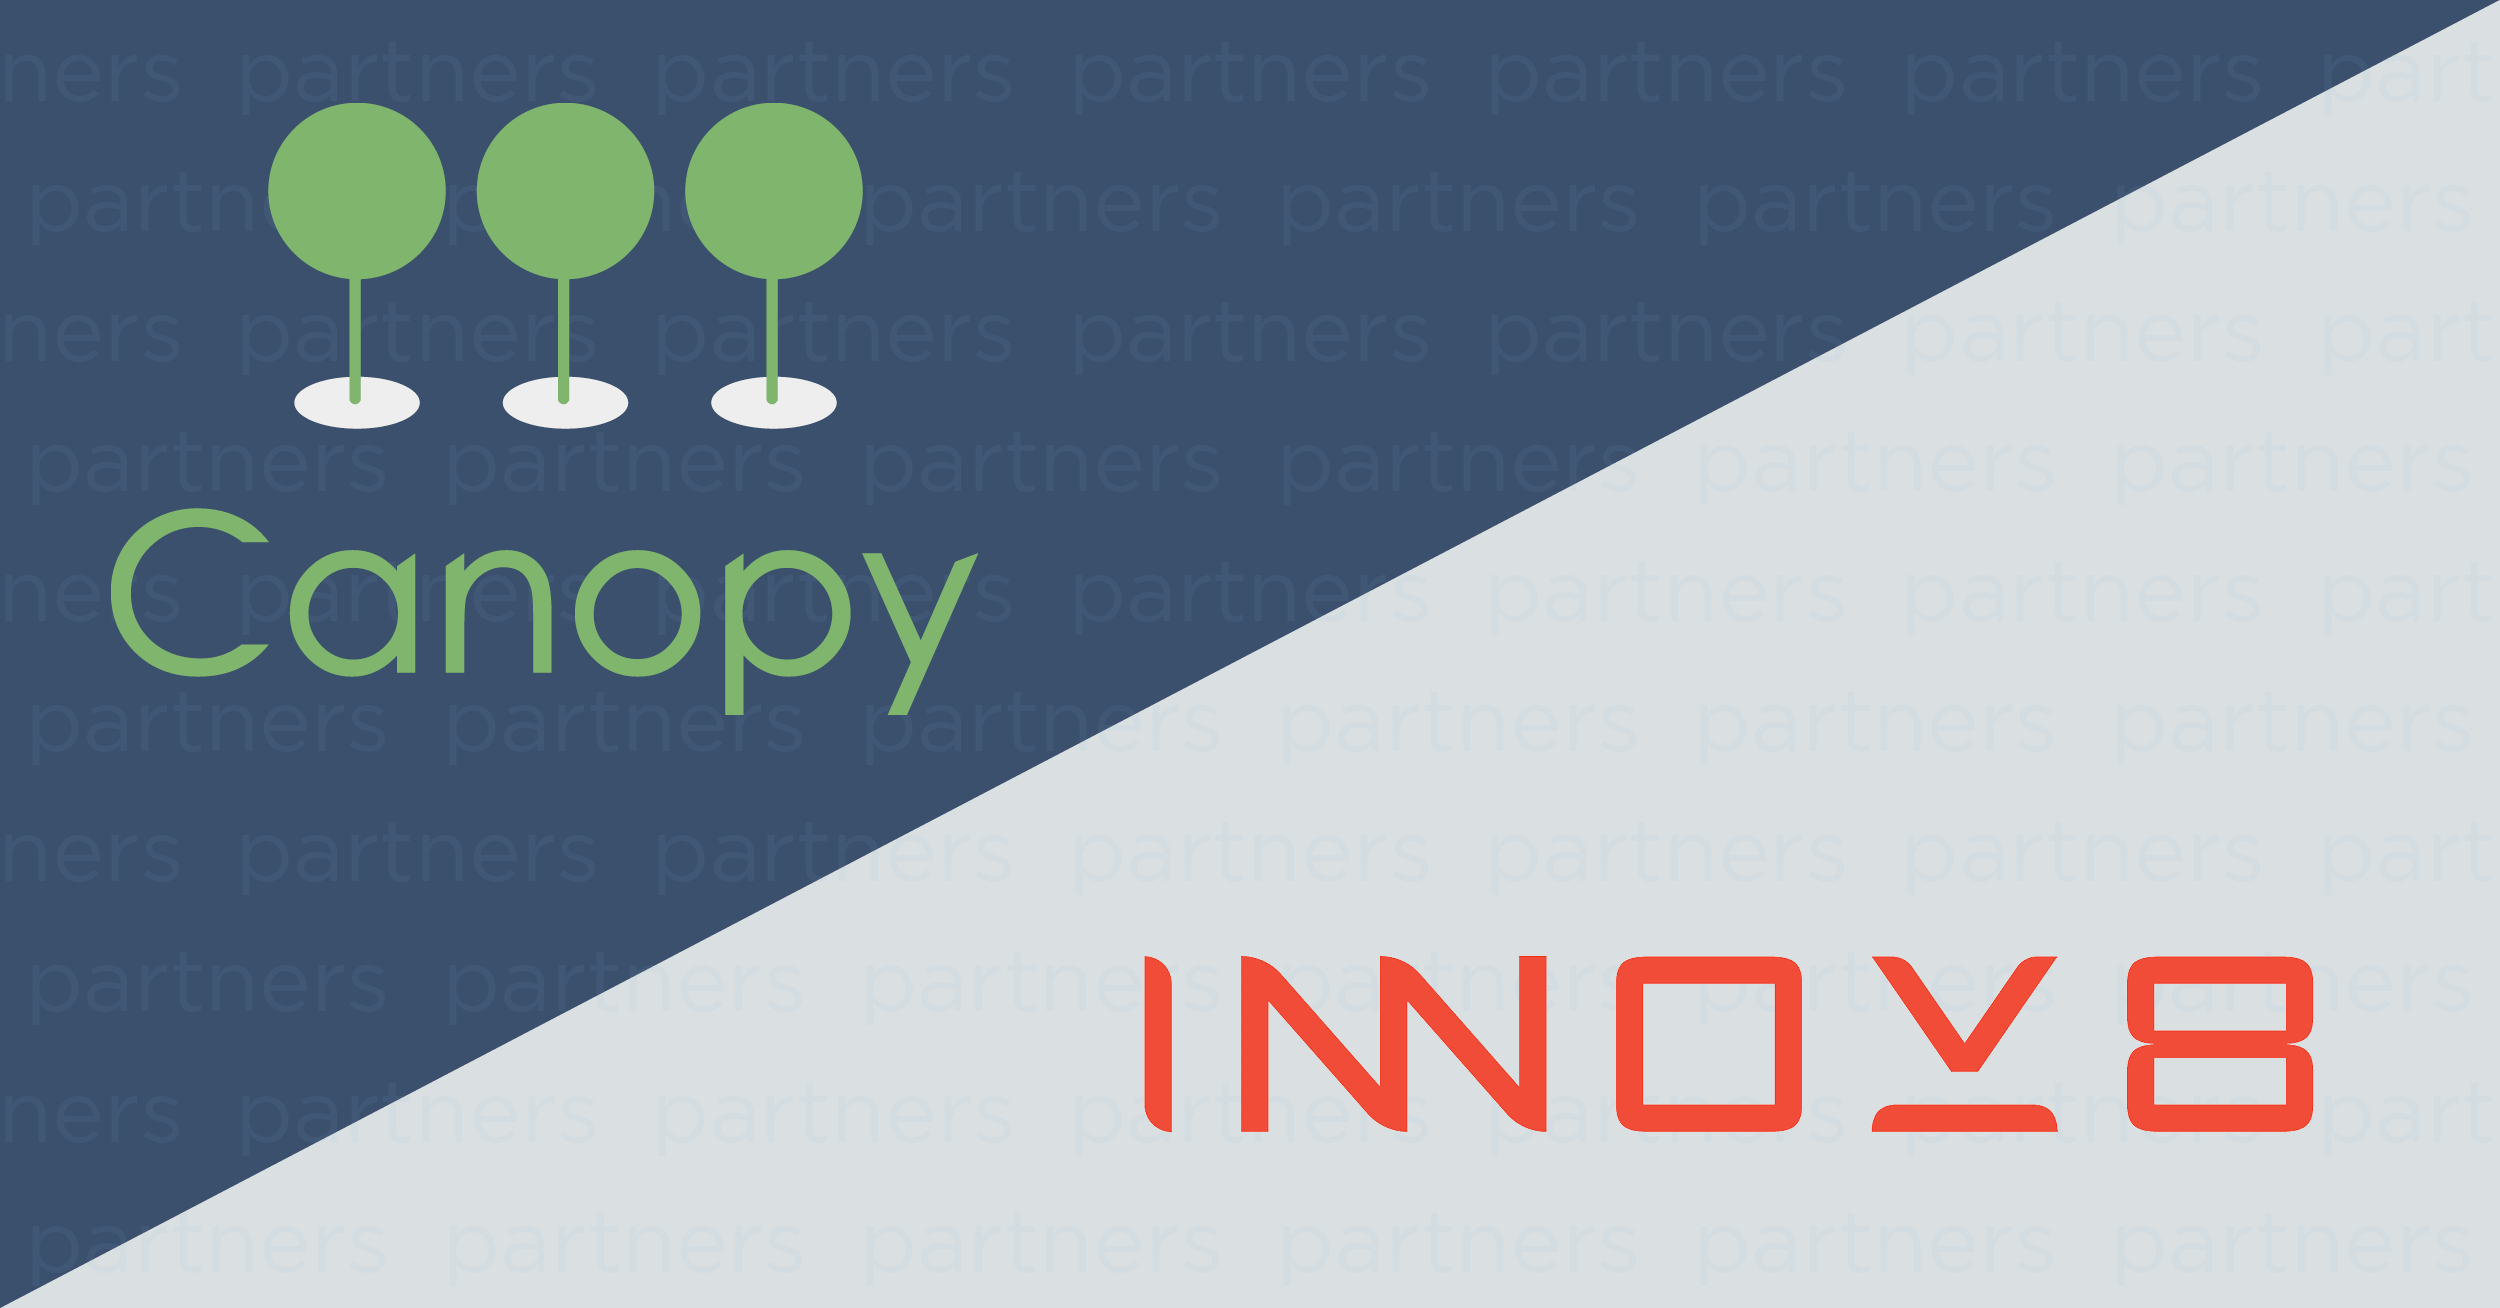 Canopy and INNOV-8 logos on a partner background